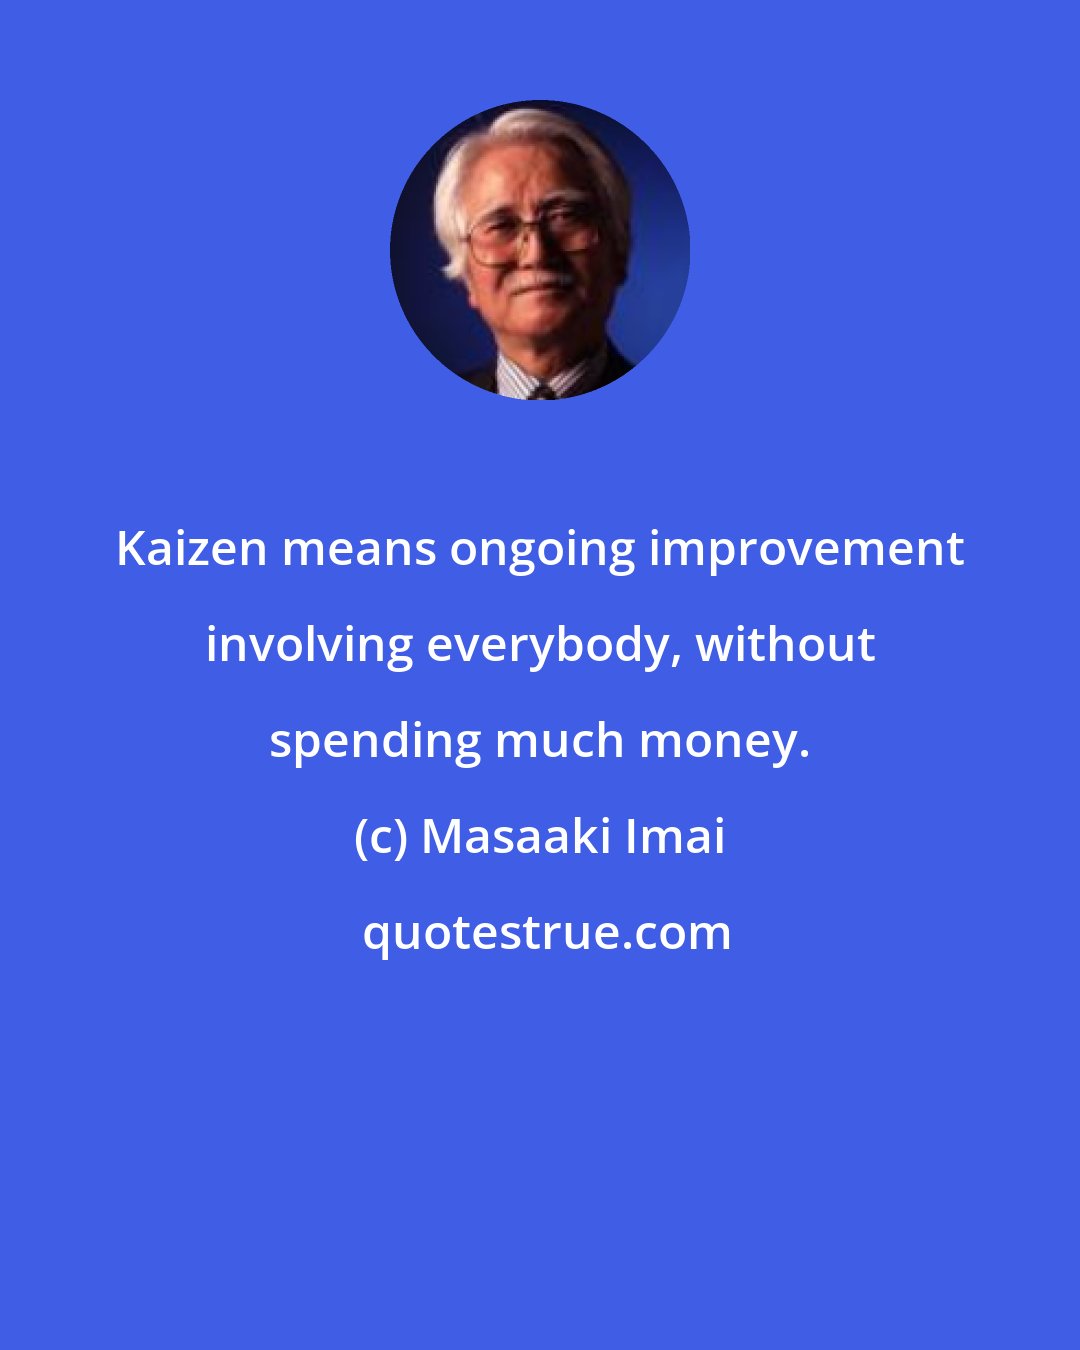 Masaaki Imai: Kaizen means ongoing improvement involving everybody, without spending much money.